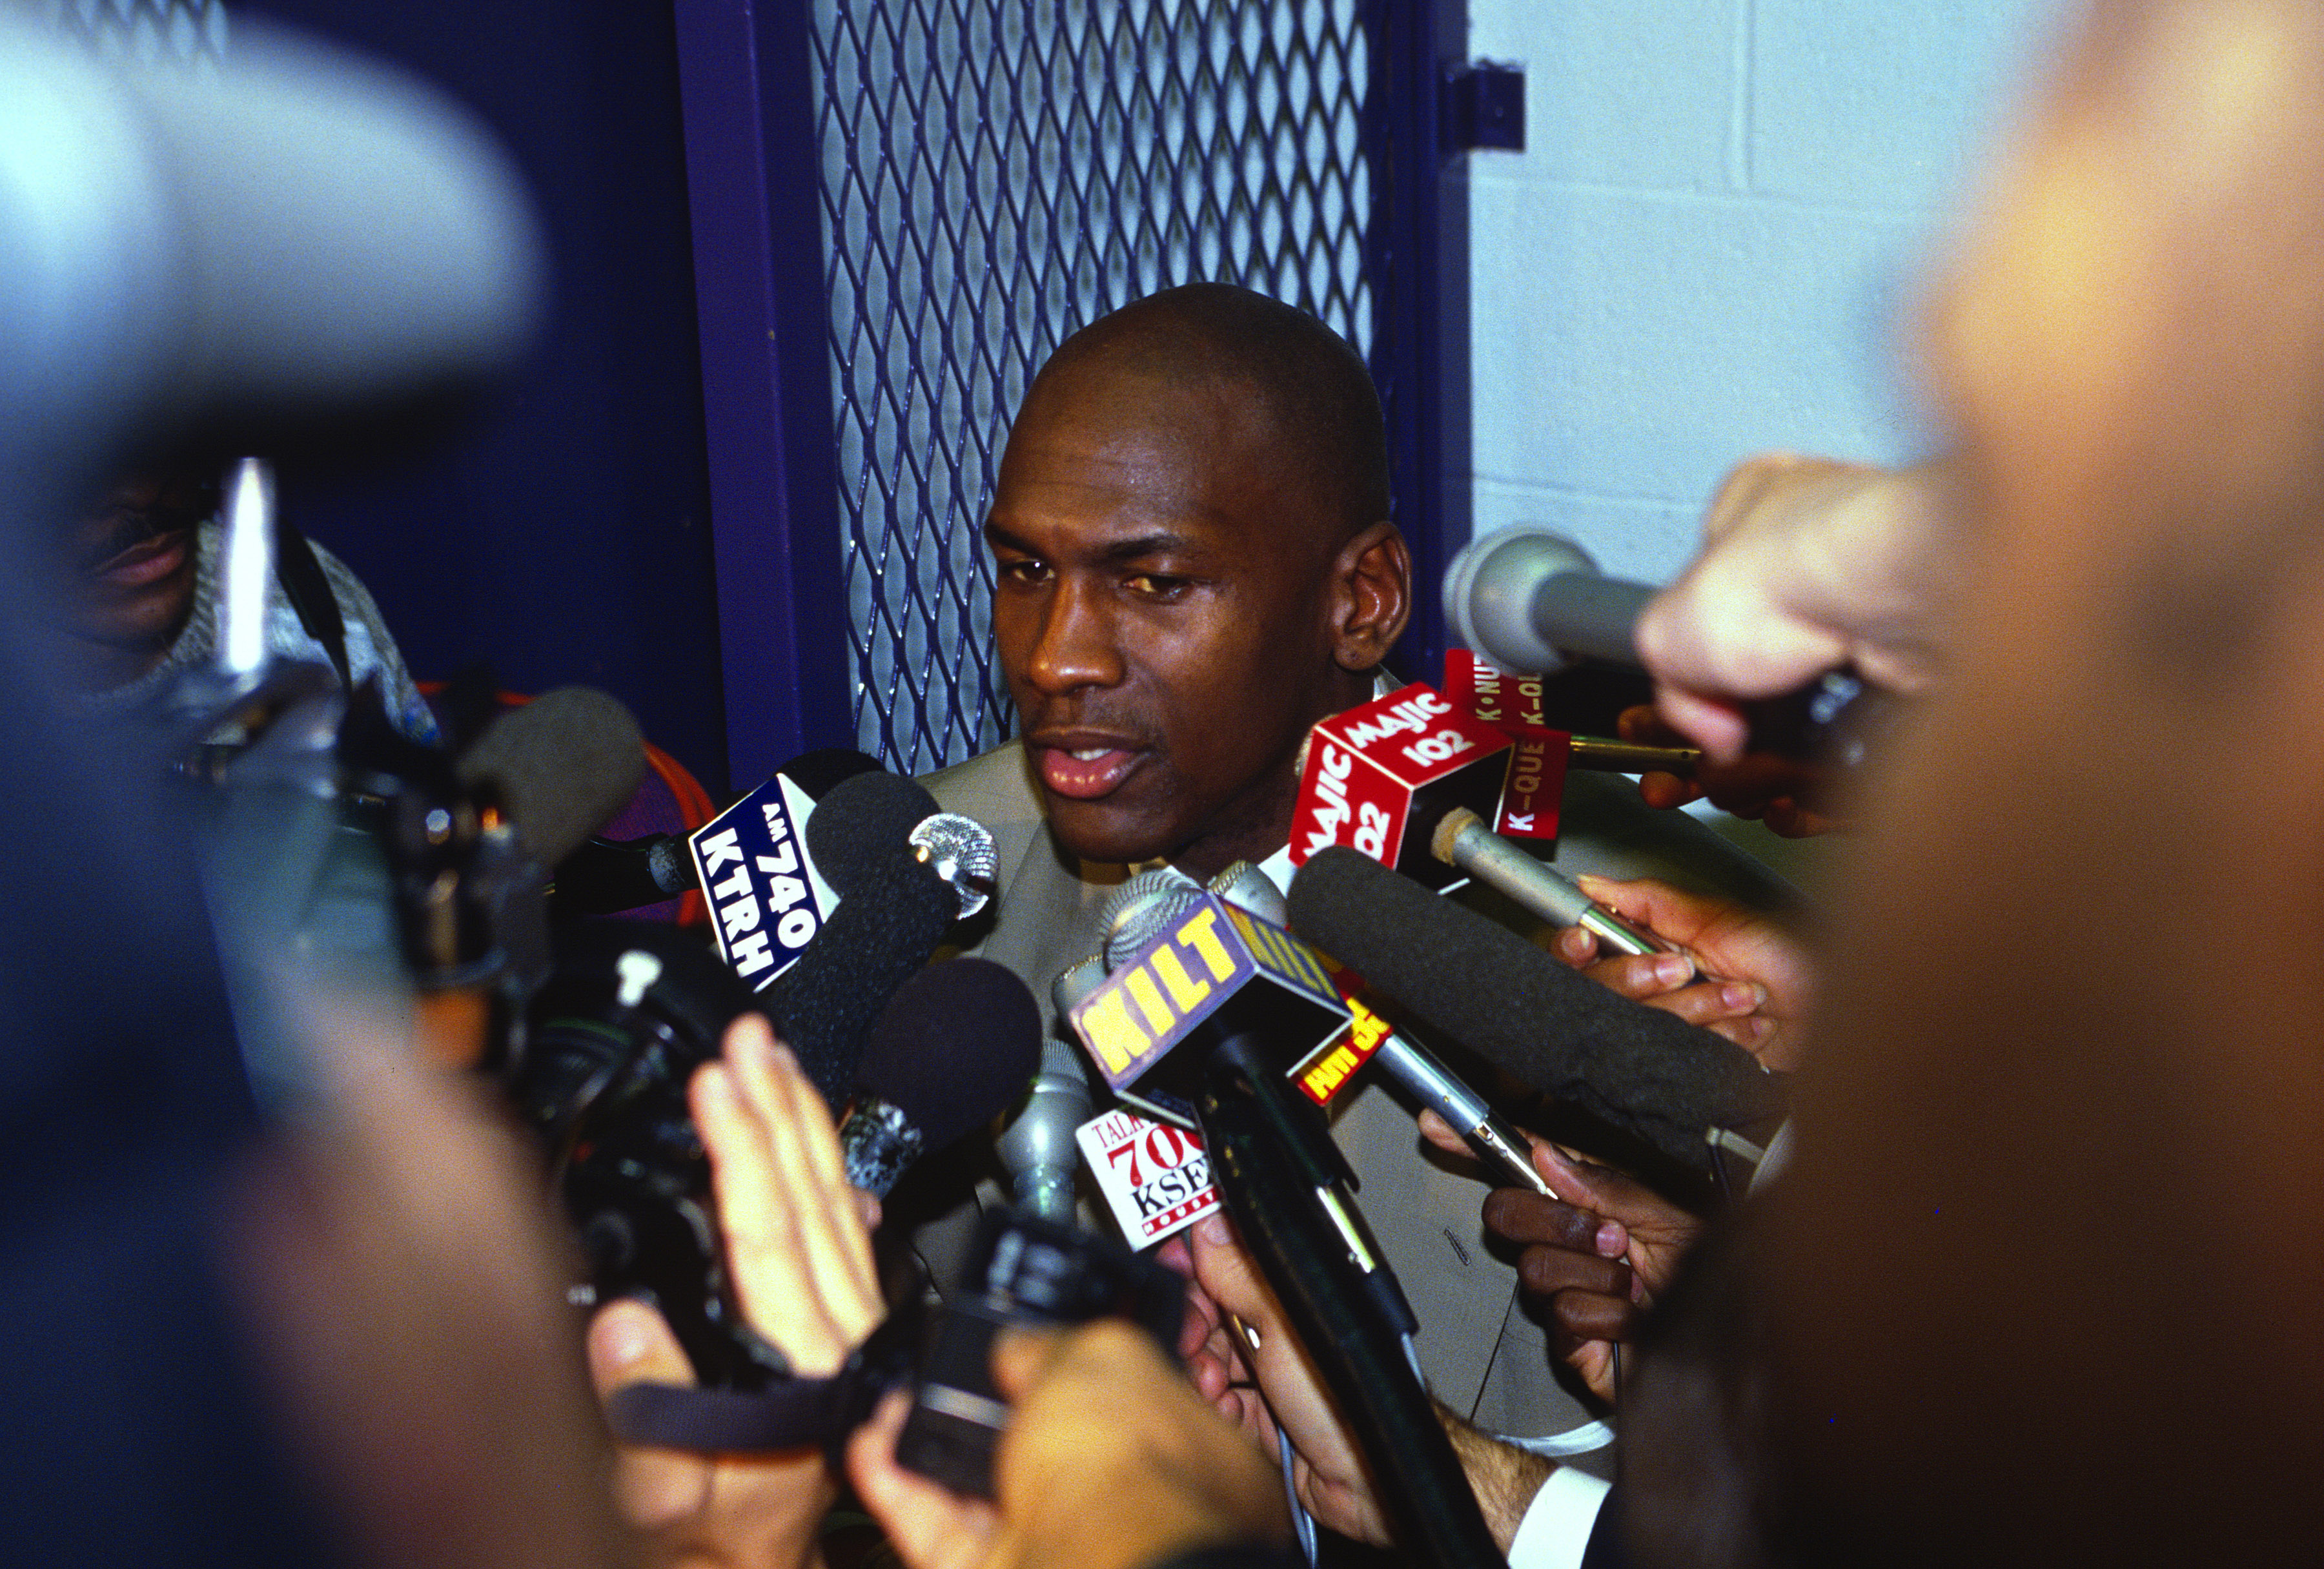 Michael Jordan’s 1992 Comment About a Helicopter Crash Eerily Foretold Kobe Bryant’s Tragic Death 28 Years Later